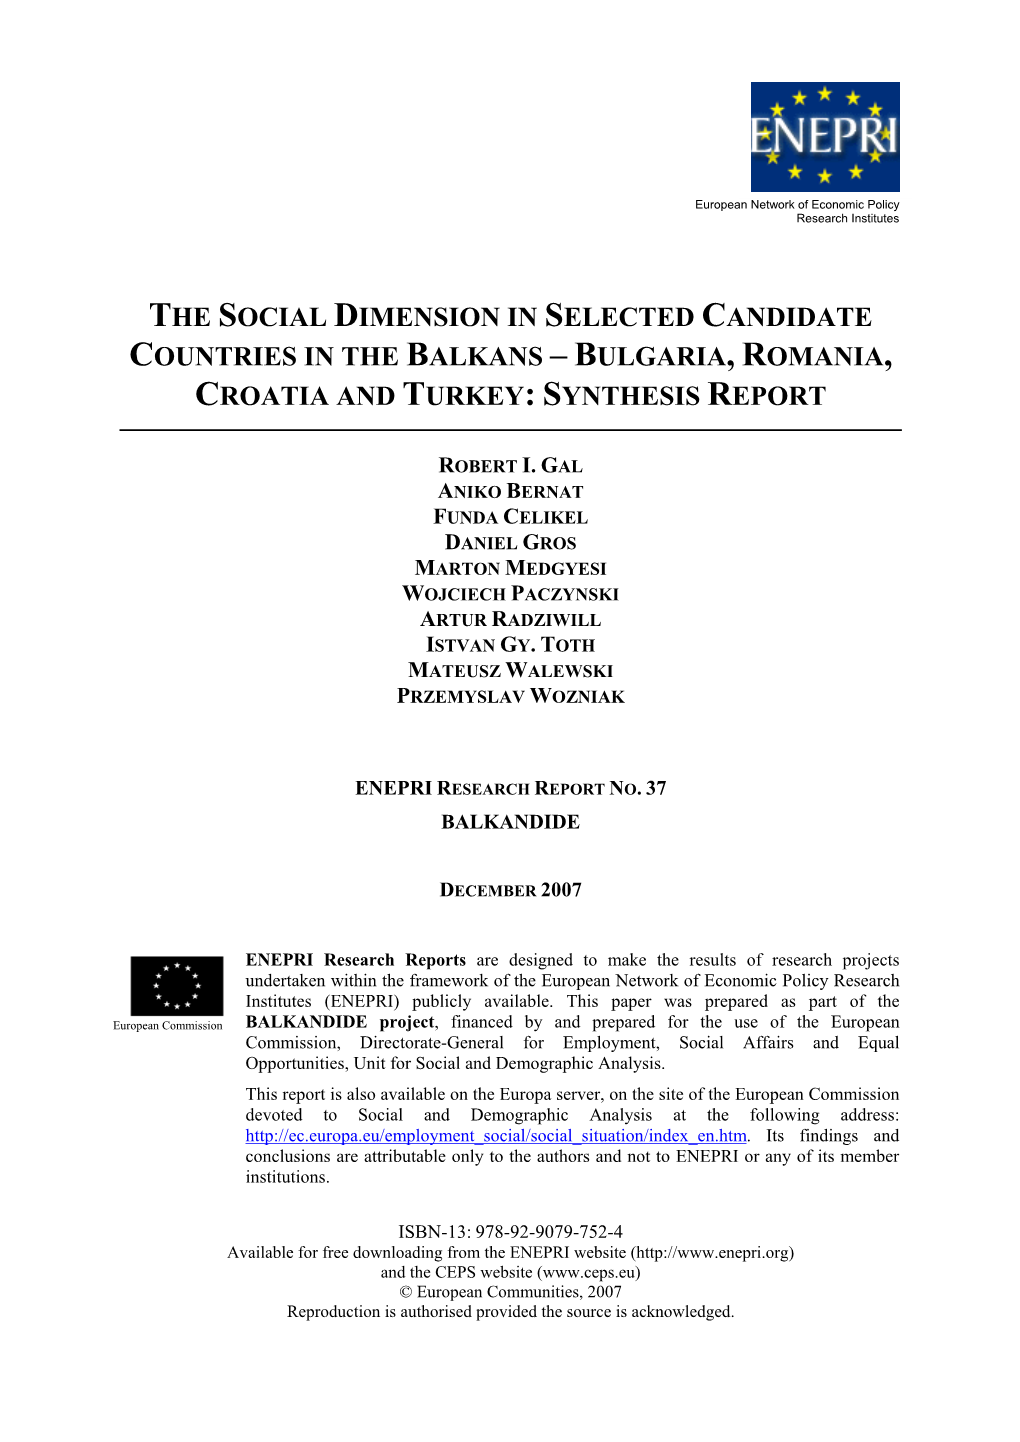 The Social Dimension in Selected Candidate Countries in the Balkans – Bulgaria, Romania, Croatia and Turkey: Synthesis Report